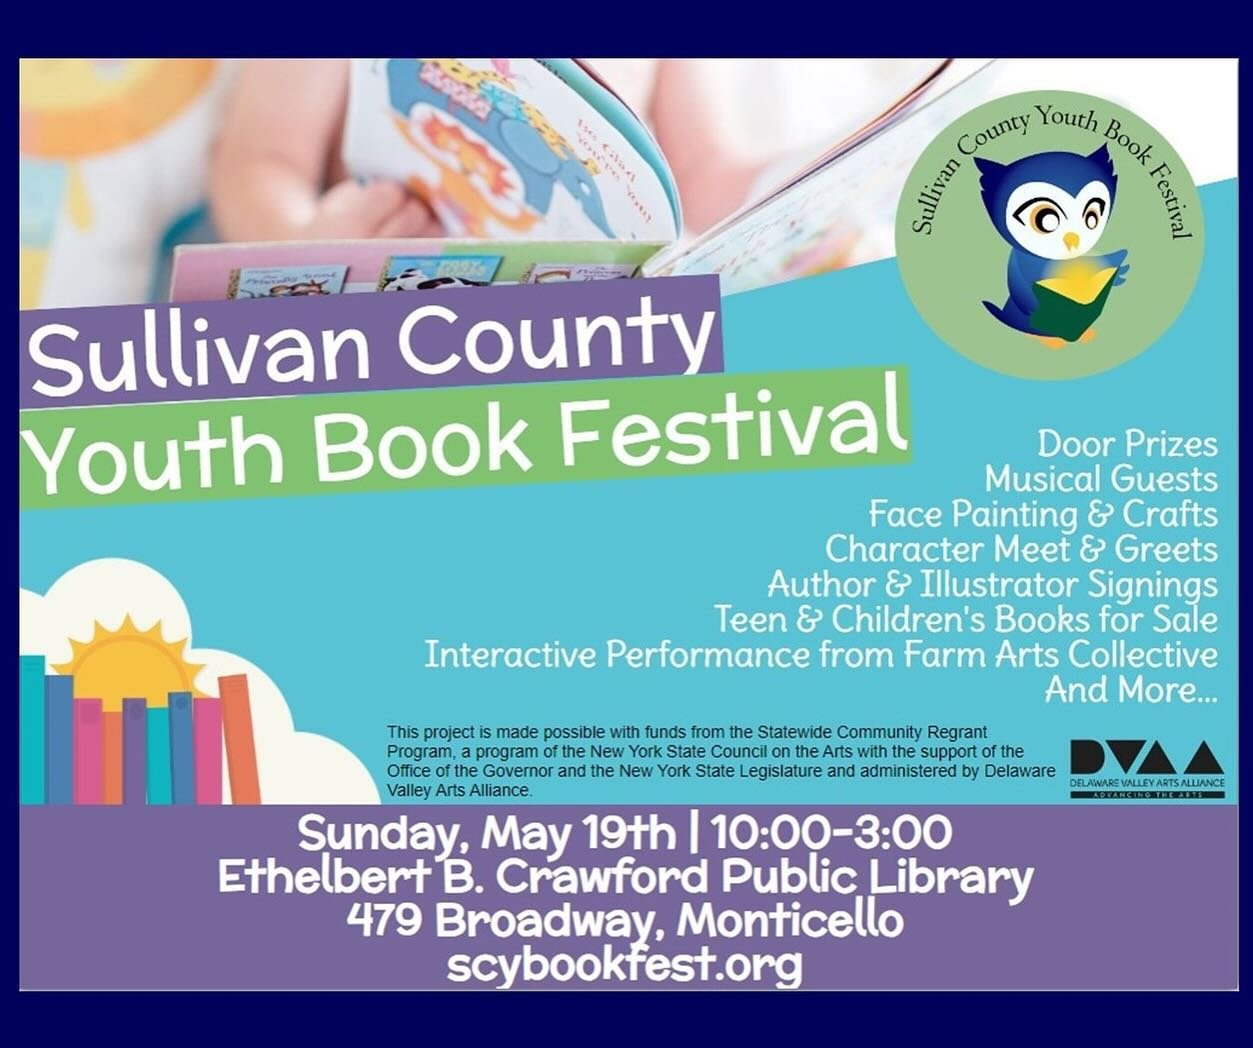 📚This Sunday @ebcplibrary in Monticello we will be performing Alice in ScienceLand at 10:15a as a part of the Sullivan County Youth Book Festival📚

Come and enjoy this wonderful, activity filled day!